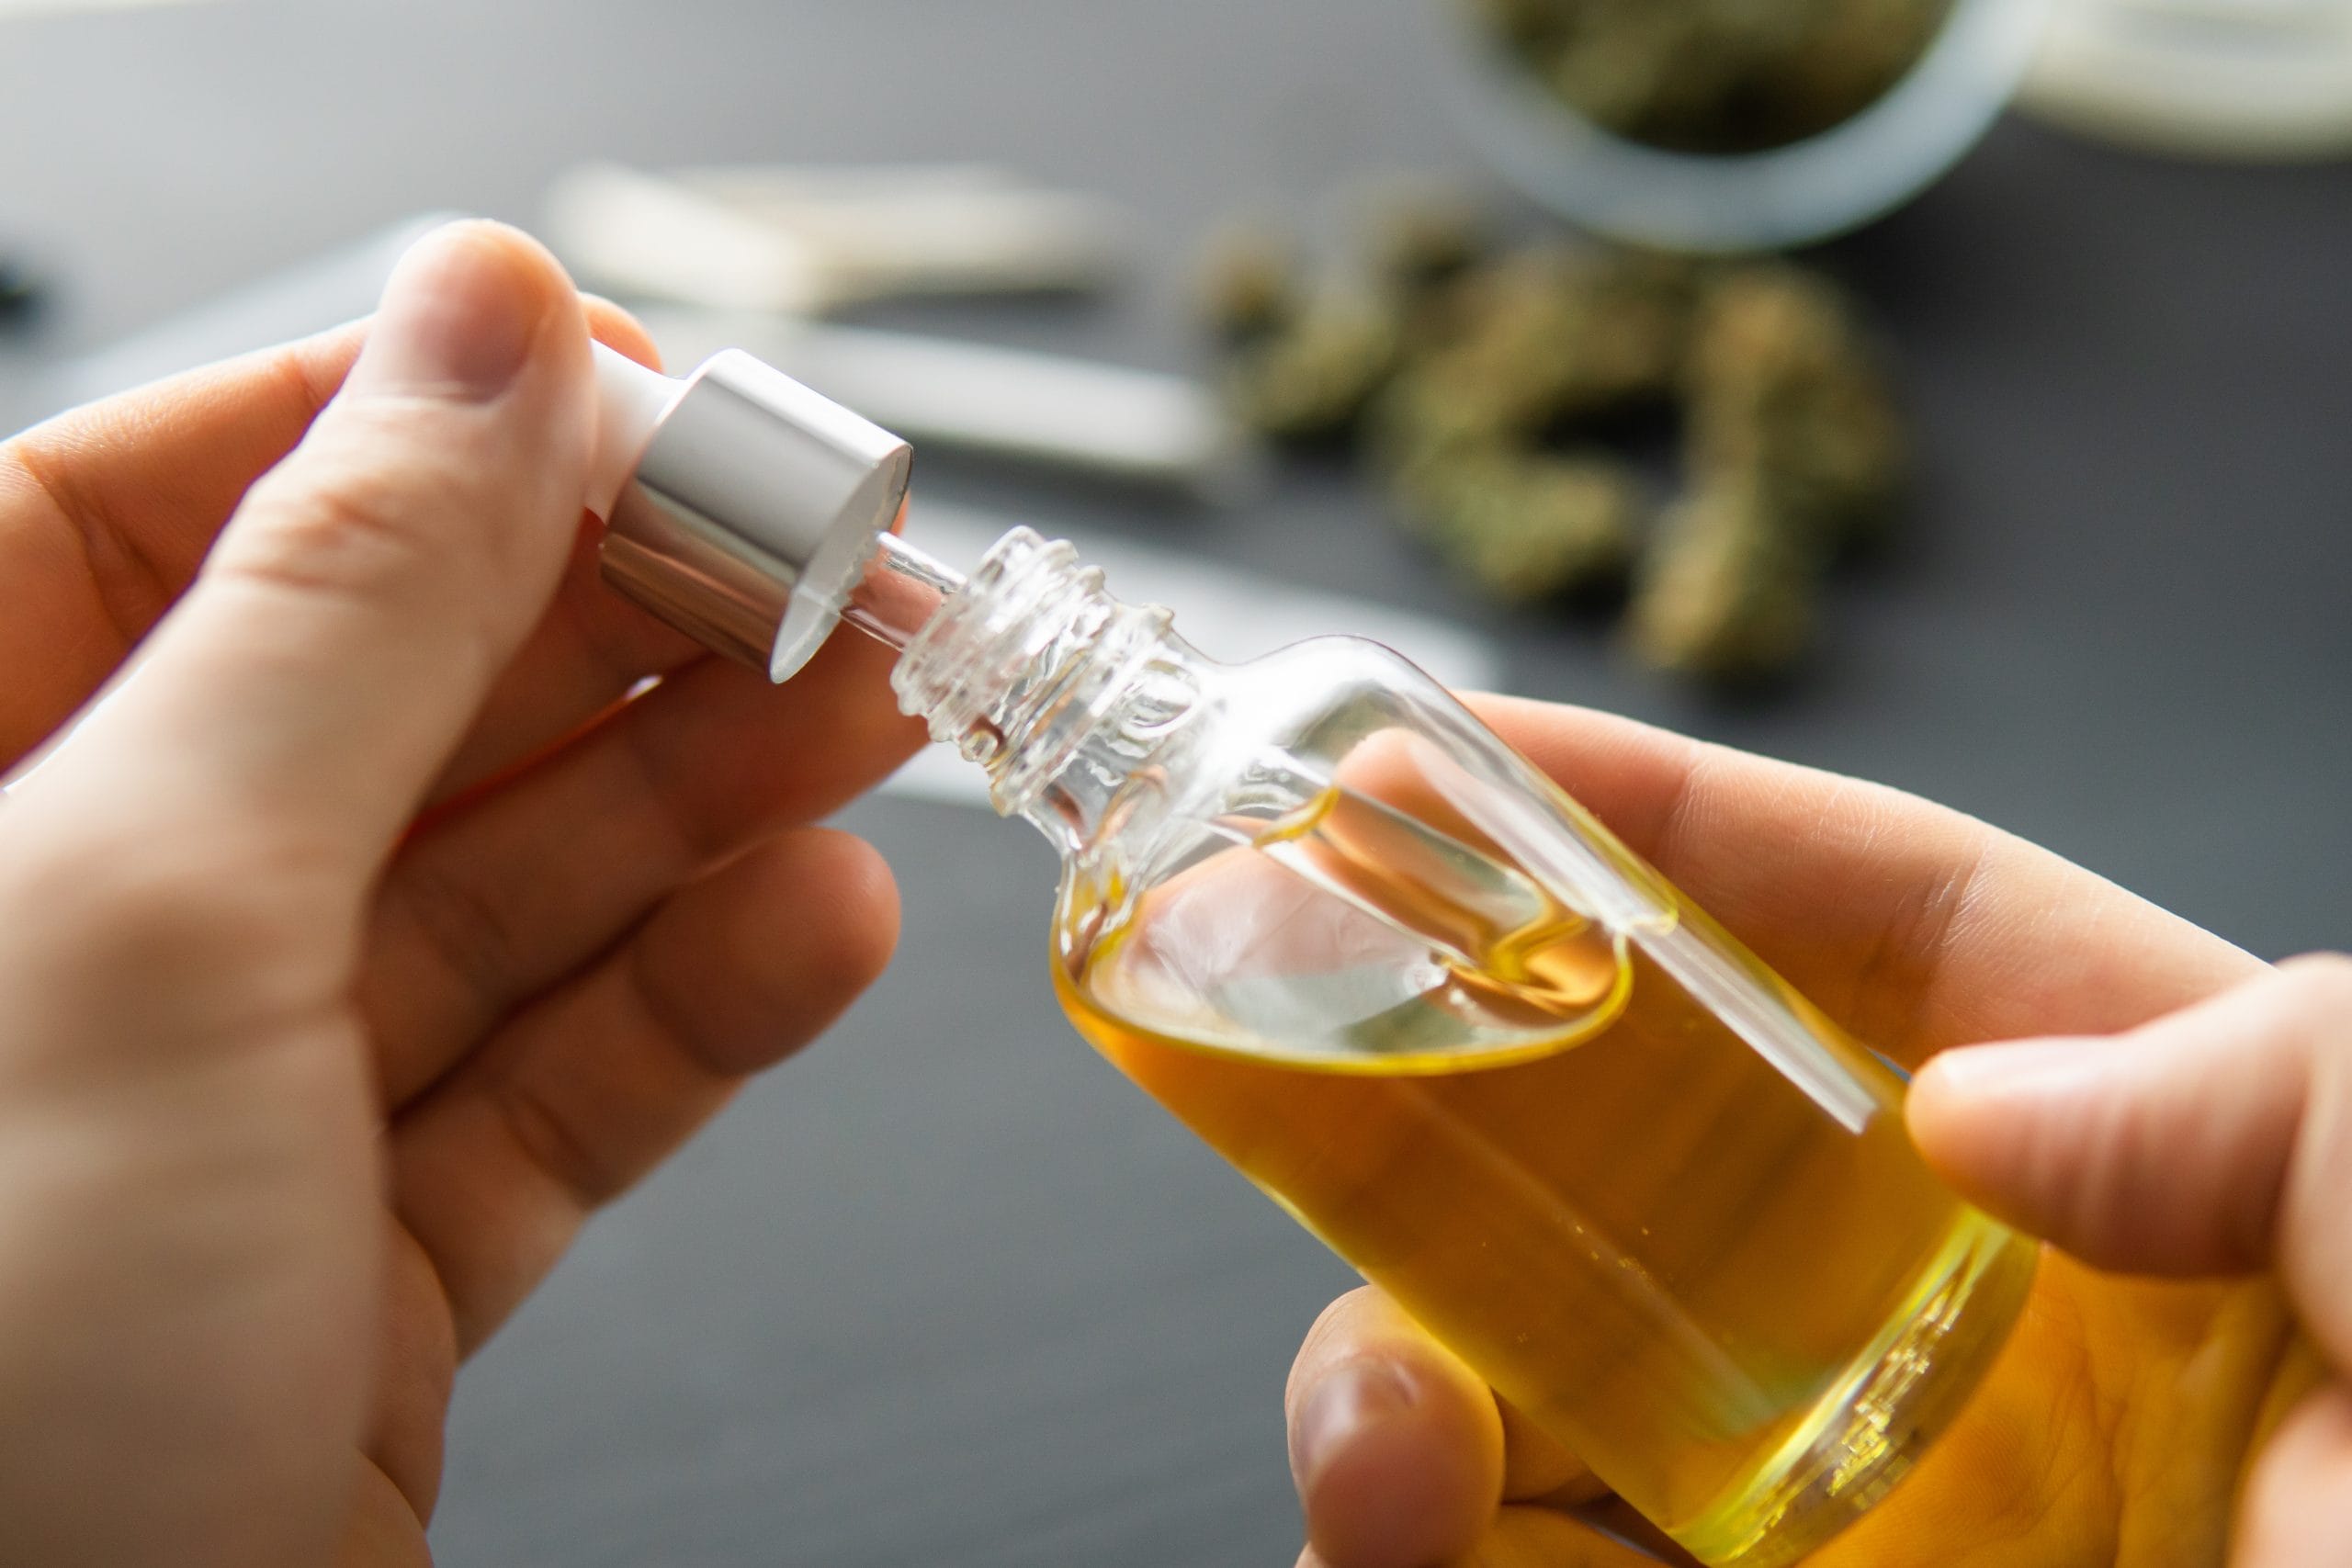 Fibromyalgia: A bottle of yellow CBD oil in a person's hands as they open the bottle